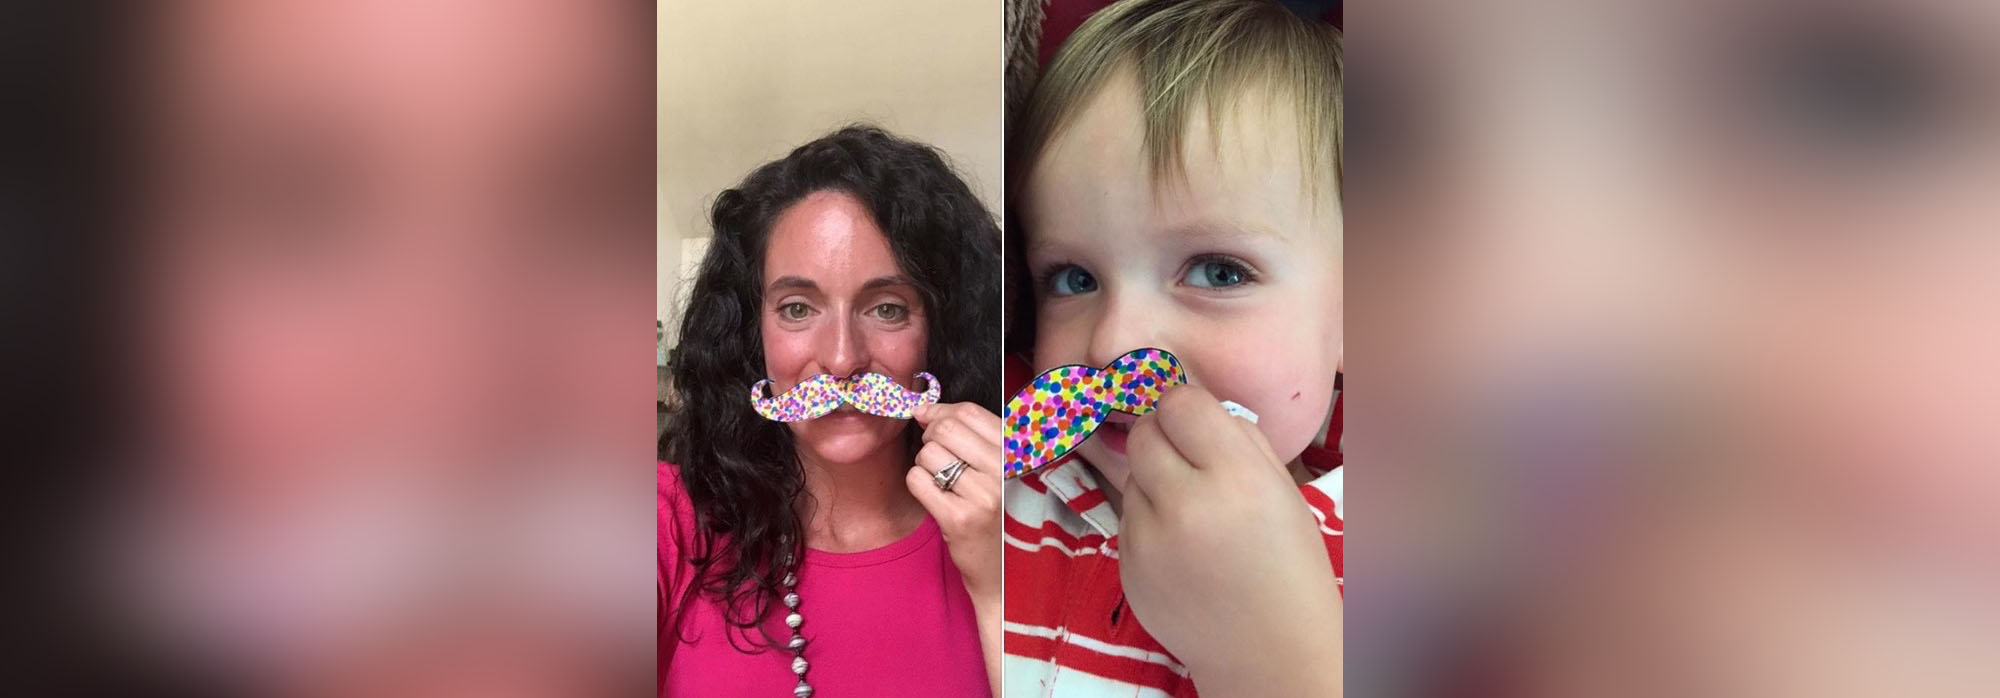 PHOTO: Ashley Diette from Chesapeake, Va. and her son Ethan. She entered a mustache design to the #RocTheStache contest.